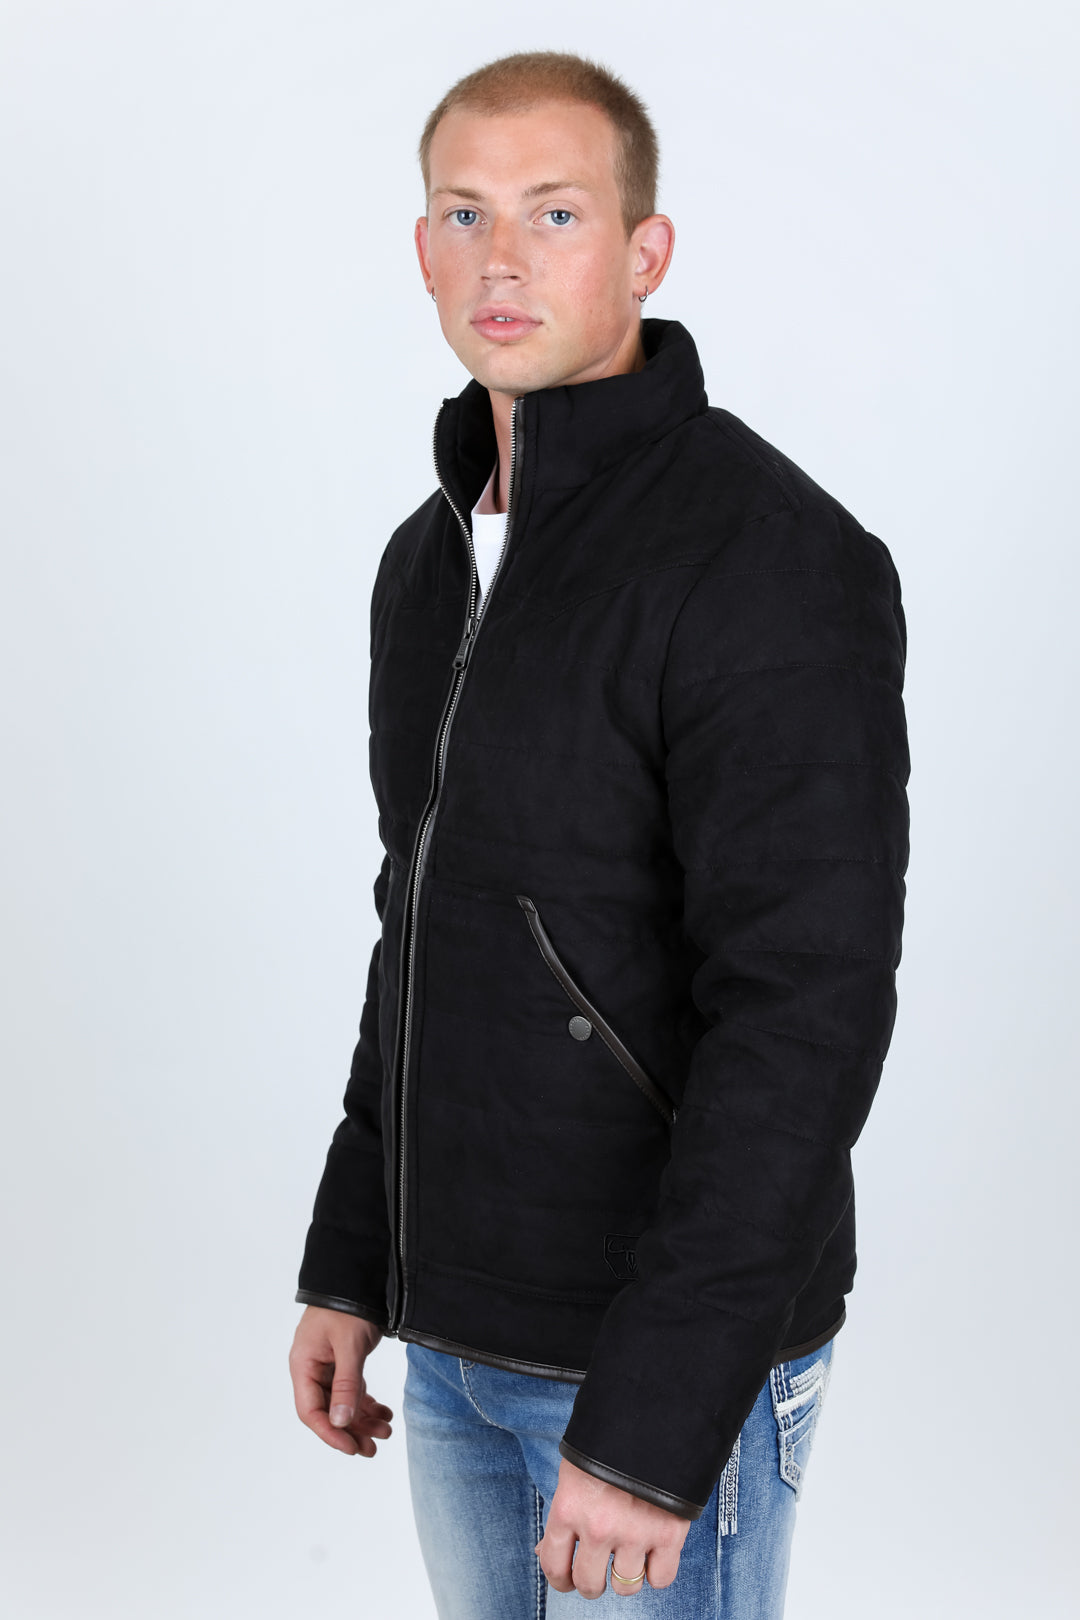 Mens Fur Lined Quilted Faux Suede Jacket - Black